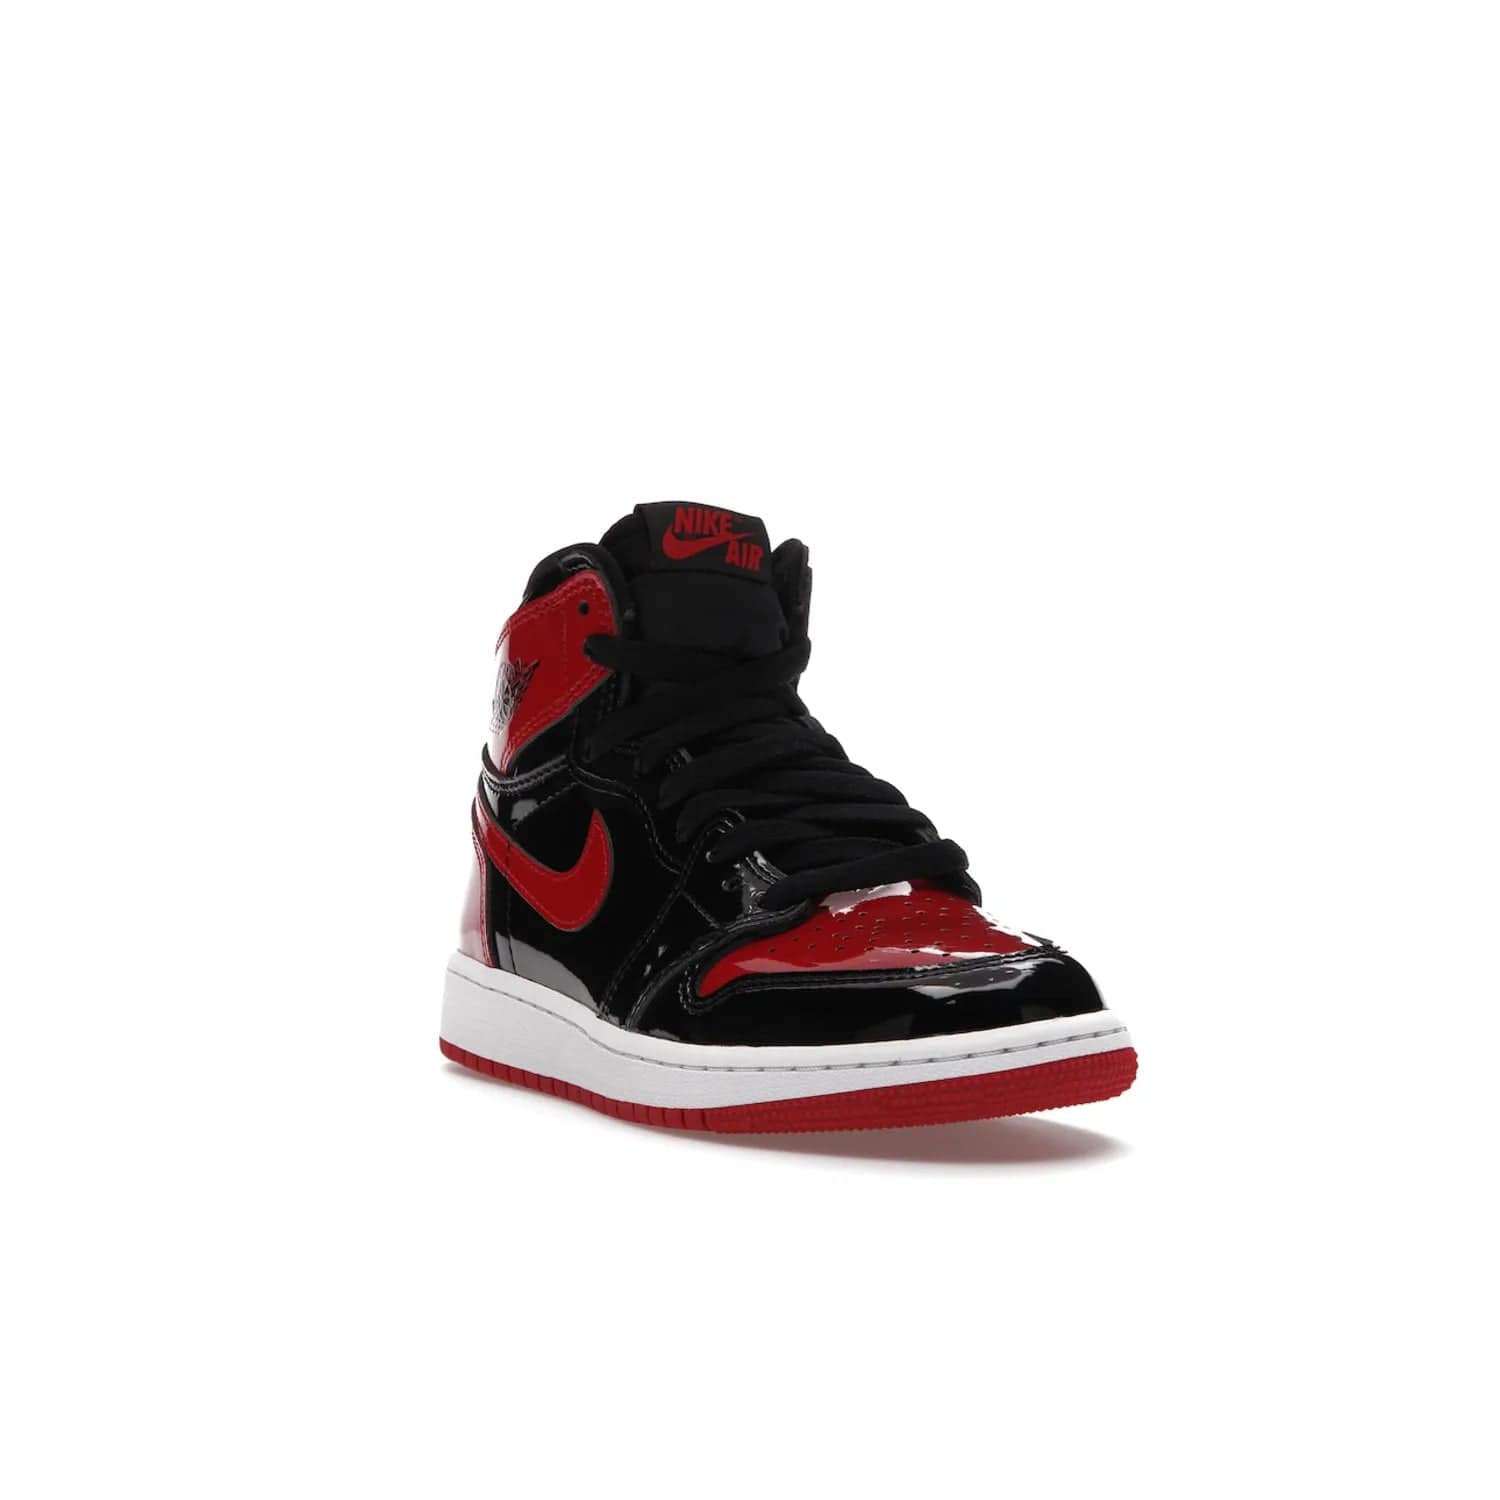 Jordan 1 Retro High OG Patent Bred (GS) - Image 7 - Only at www.BallersClubKickz.com - Upgrade your sneaker game with the iconic Air Jordan 1 Retro High OG Bred Patent GS. Crafted with premium patent leather and basketball-inspired details for a classic look, they also feature an encapsulated Air-sole cushioning and enhanced red rubber outsole. Don't miss this timeless sneaker with a striking black, white, and varsity red colorway, dropping December 2021.